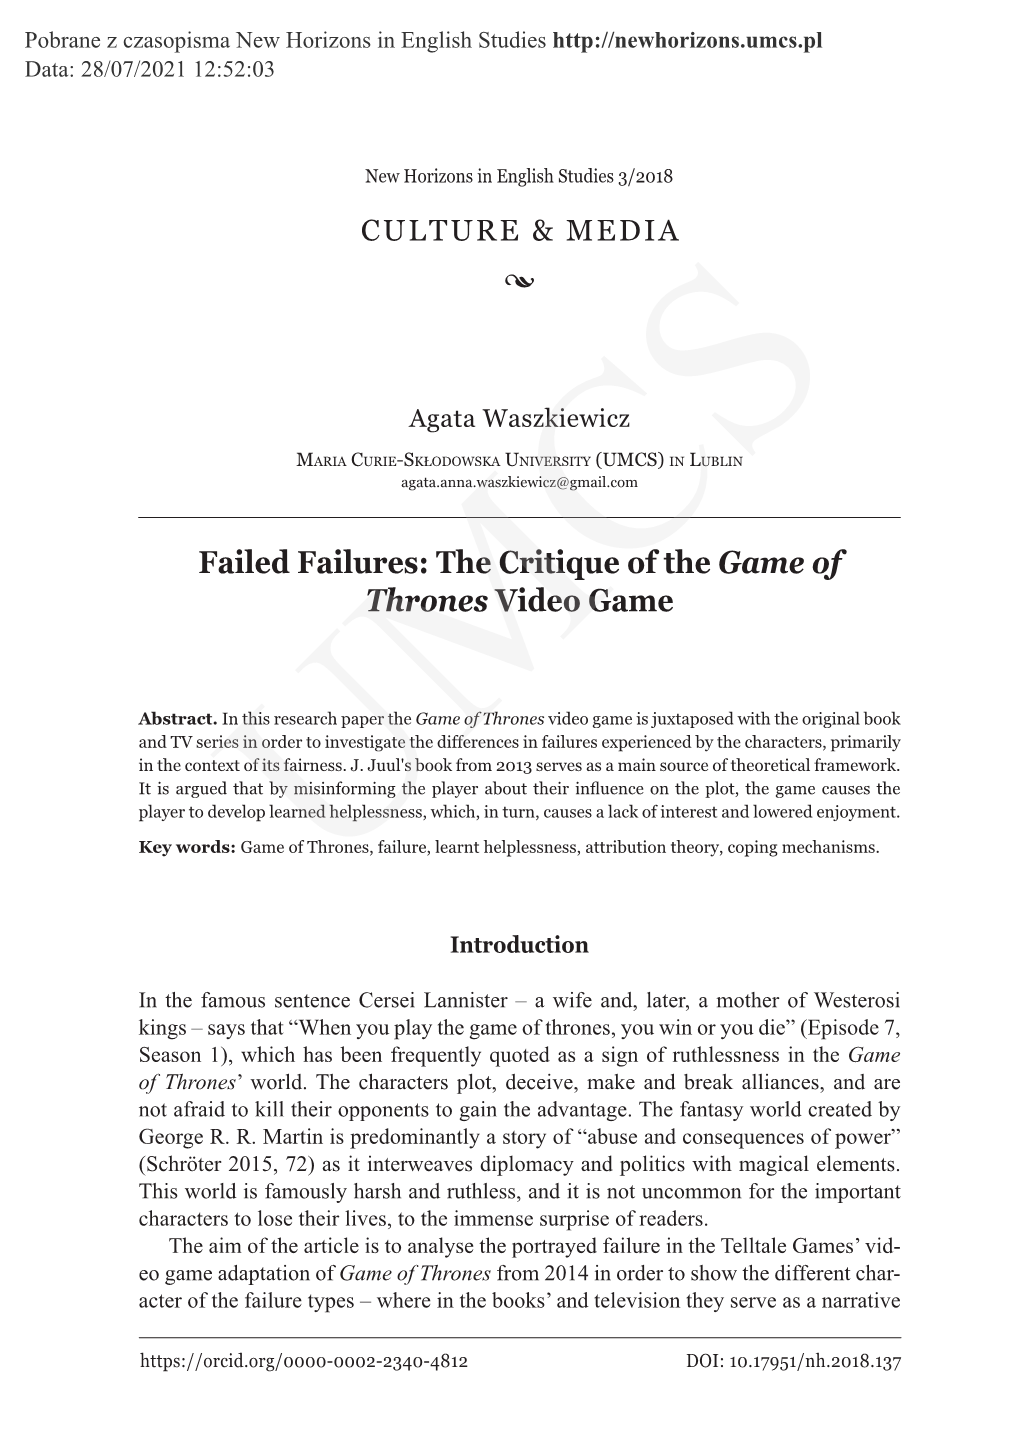 Failed Failures: the Critique of the Game of Thrones Video Game